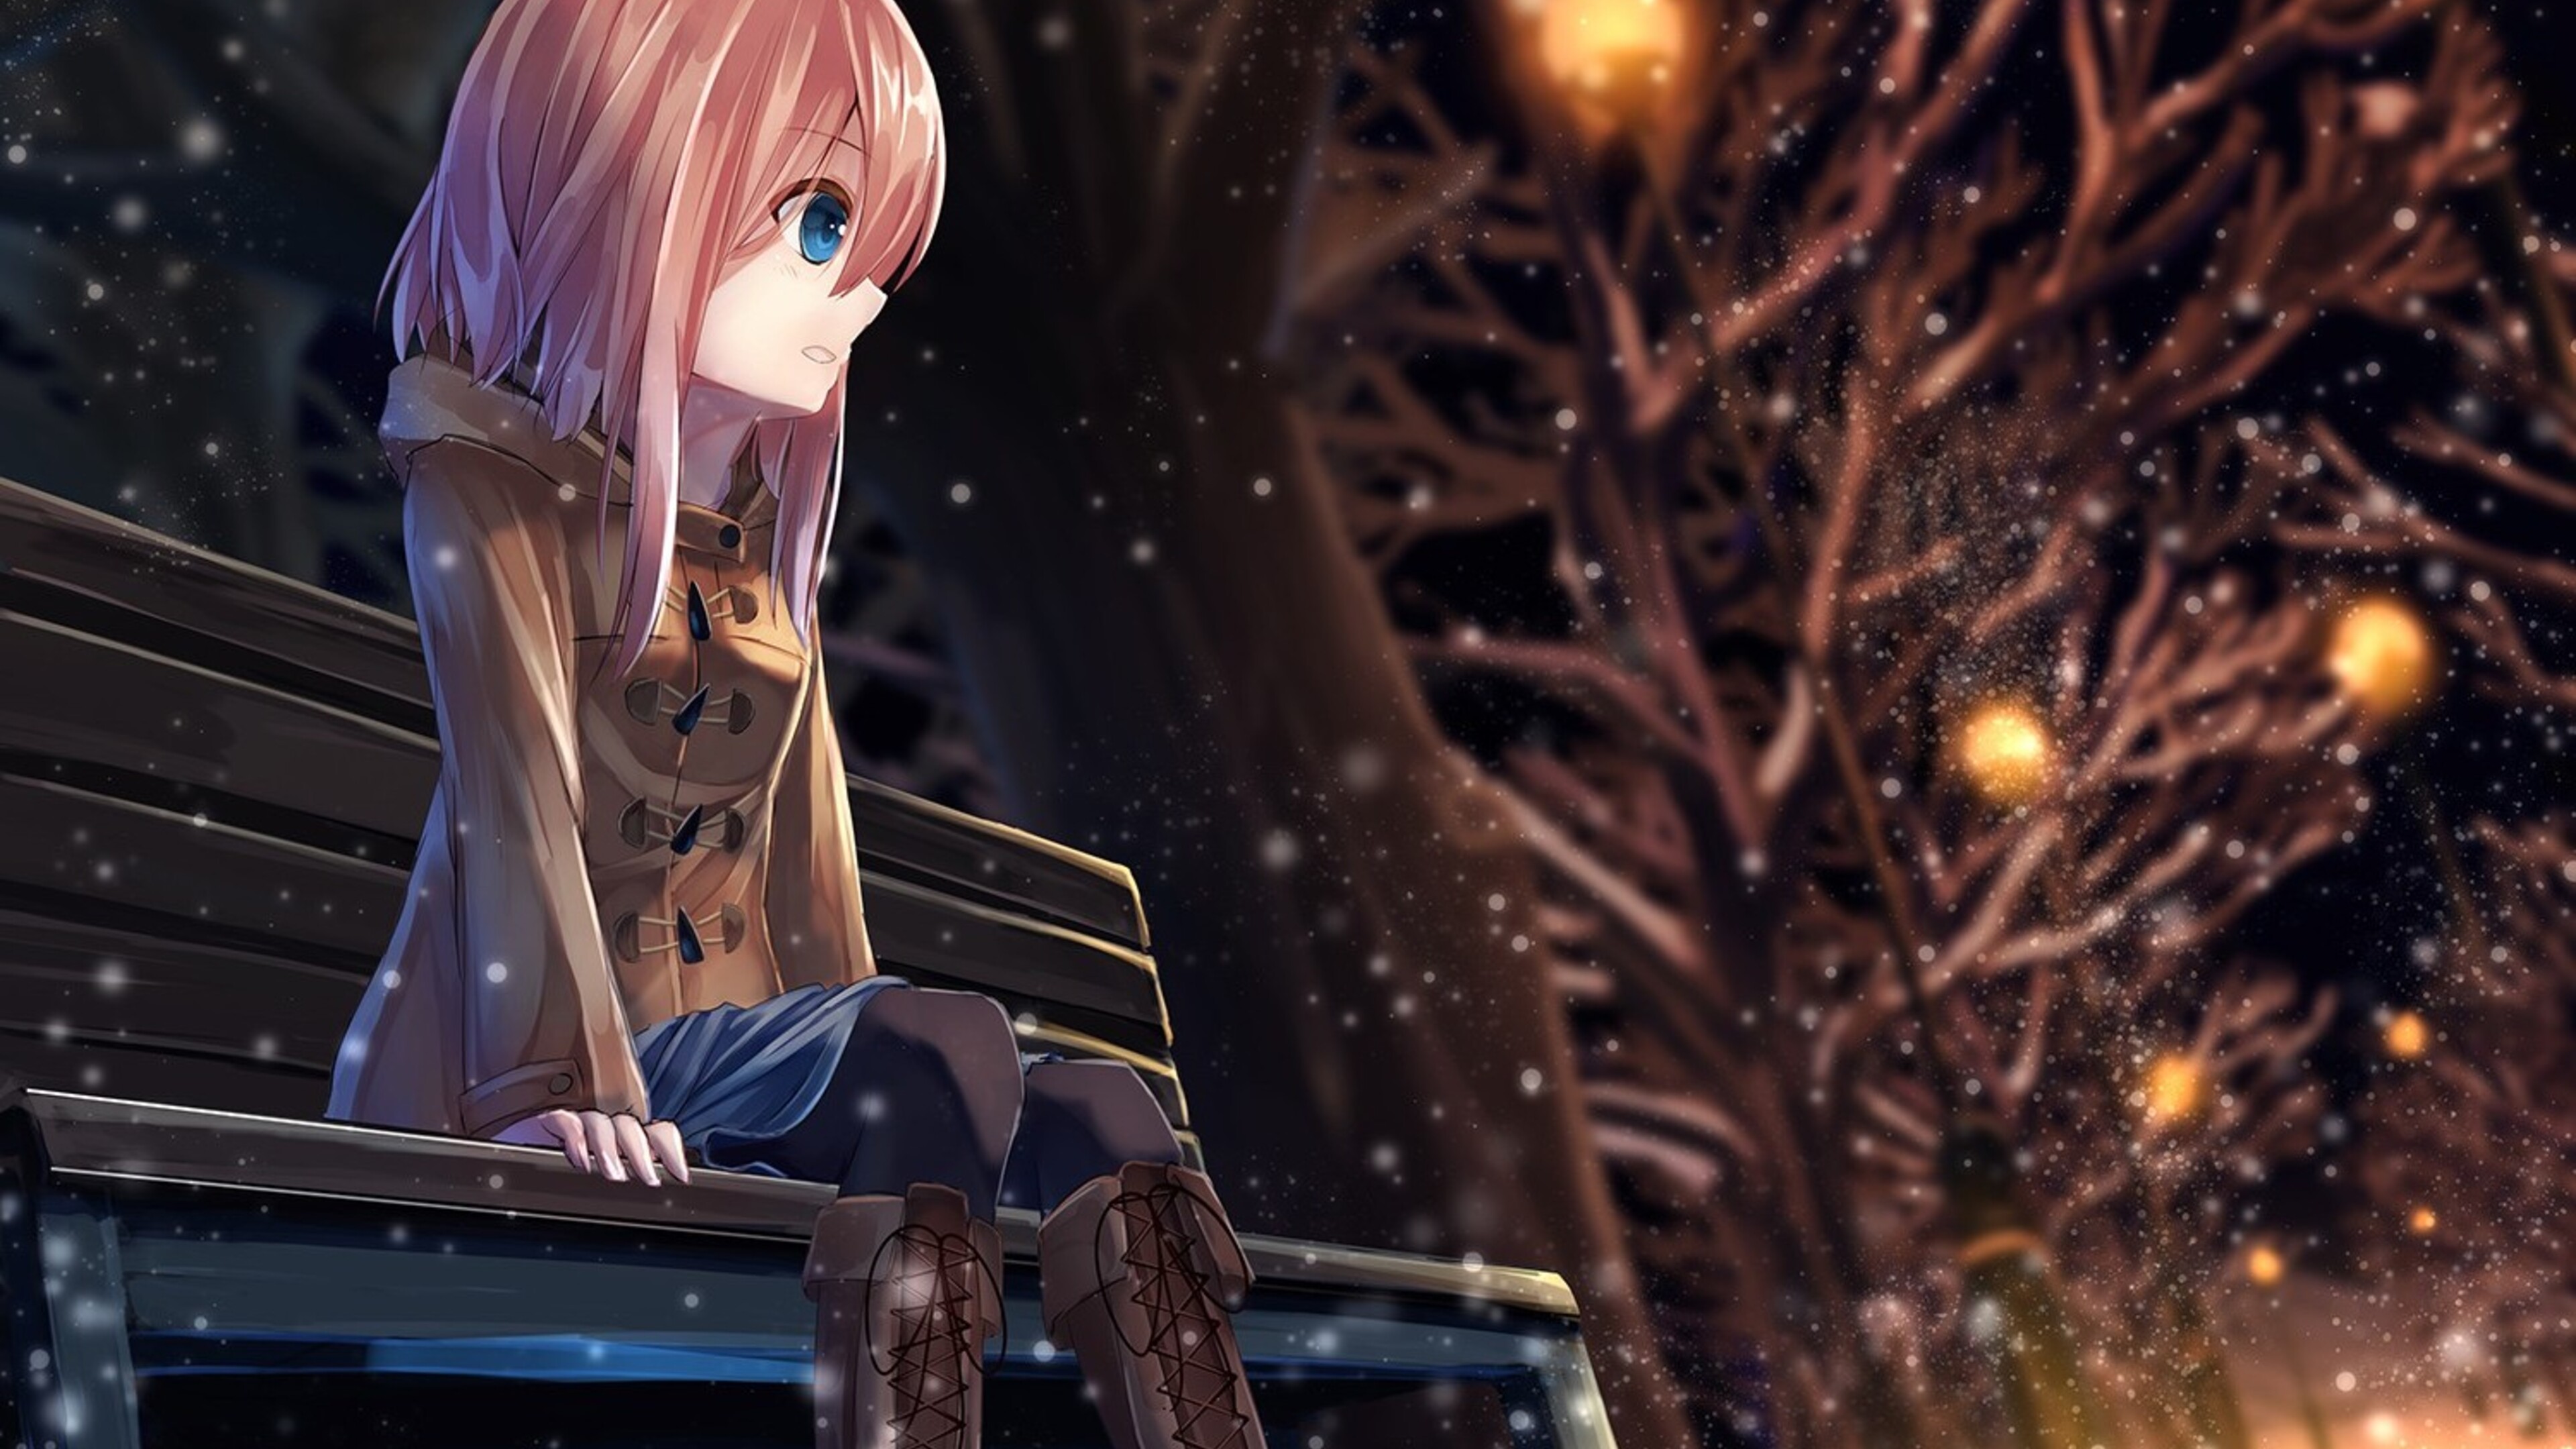 3840x2160 Anime Girl Alone 4k HD 4k Wallpapers, Images ...